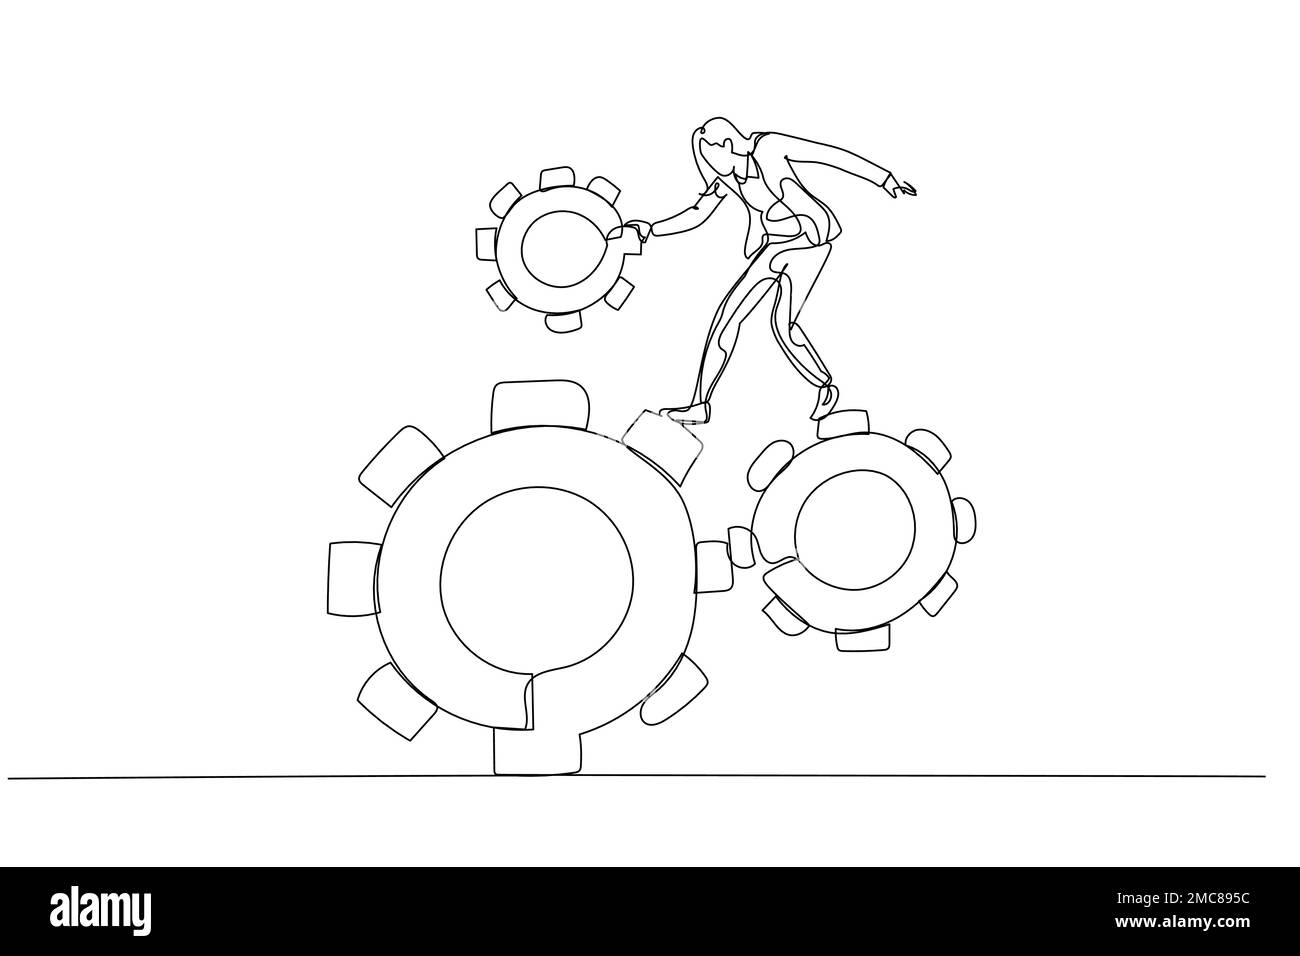 Drawing of businesswoman & gear. Single line art style Stock Vector